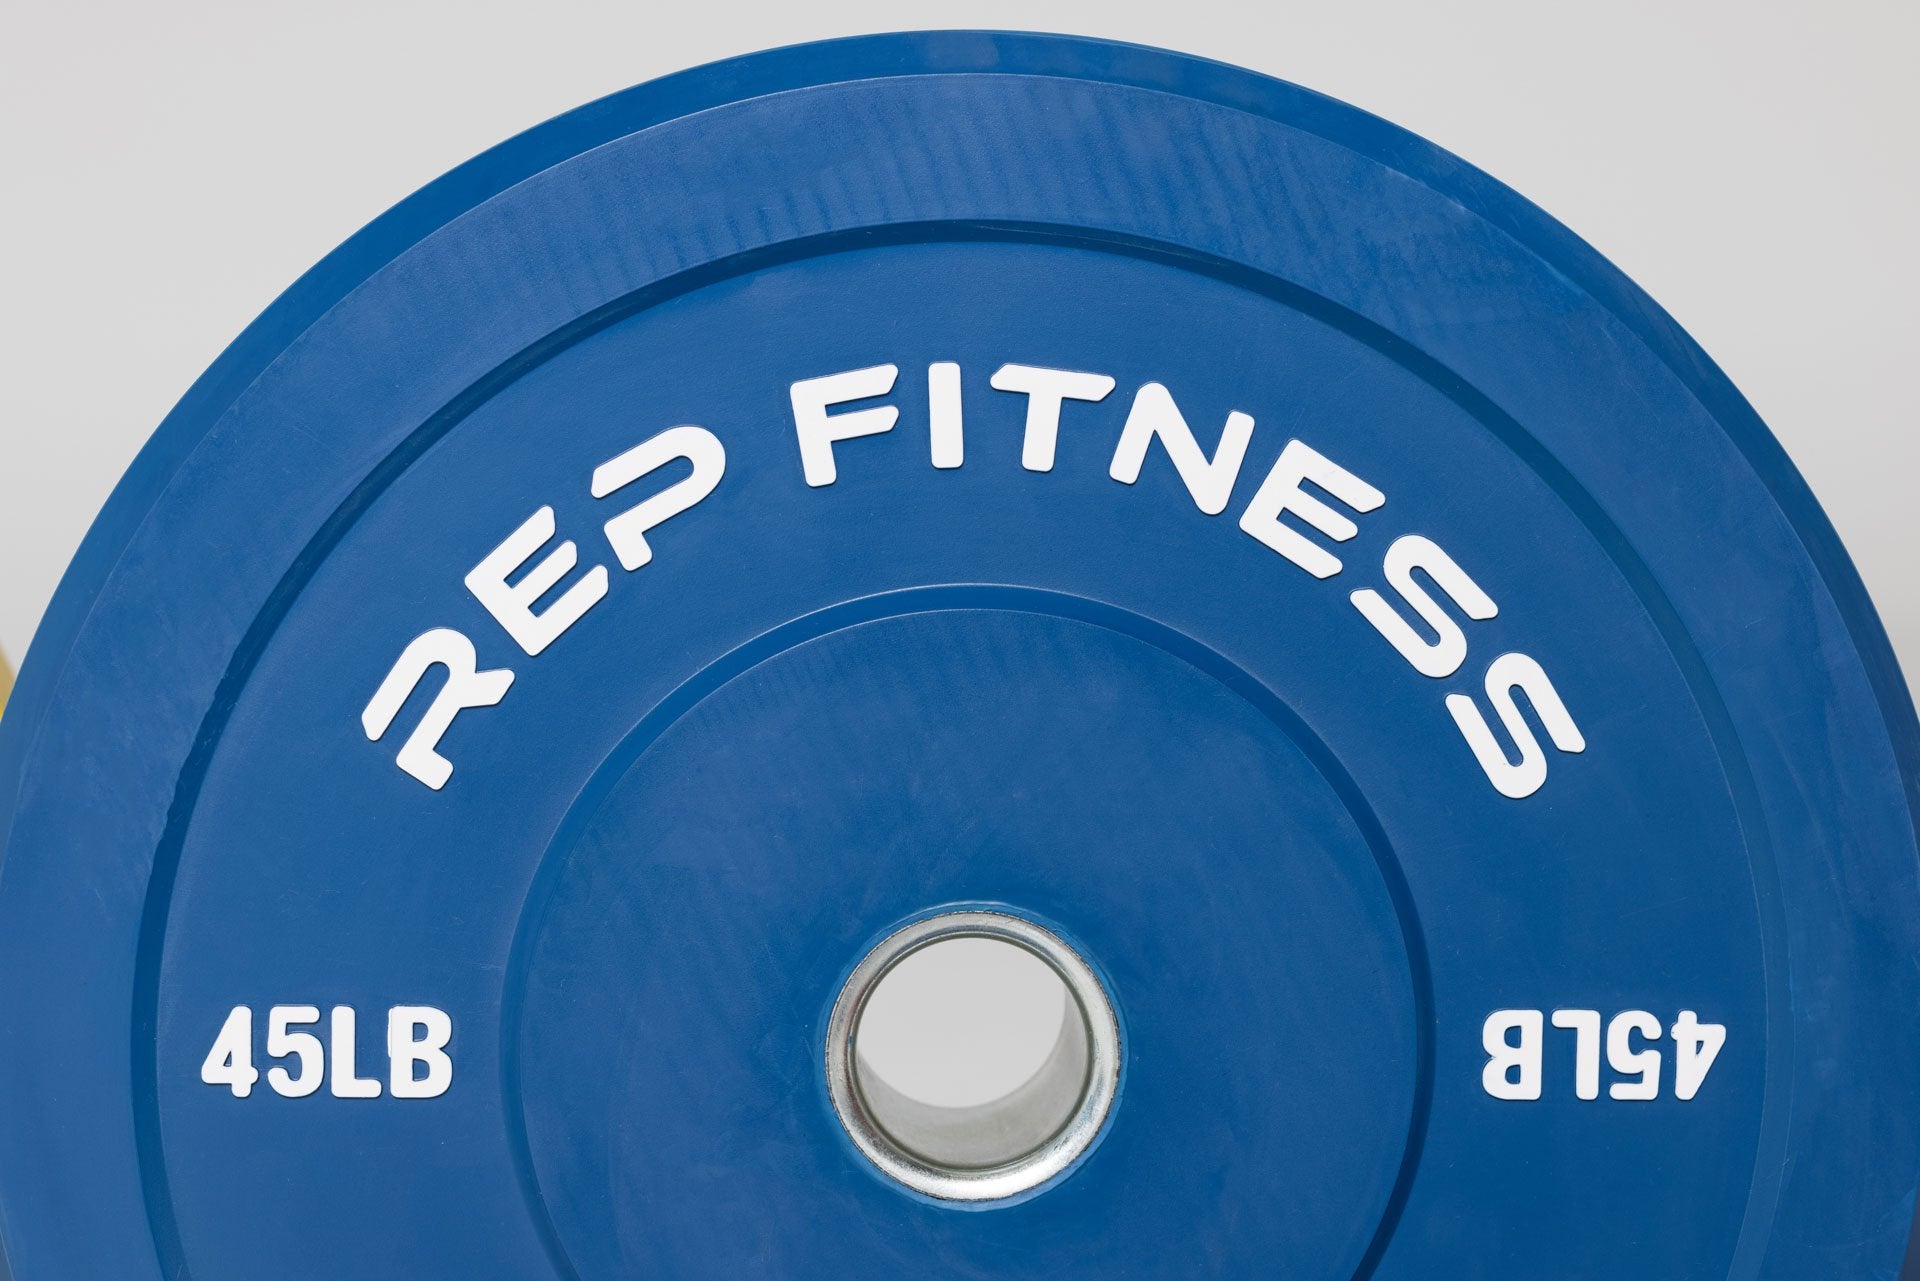 Close-up view of blue 45lb color bumper plate showing white raised 